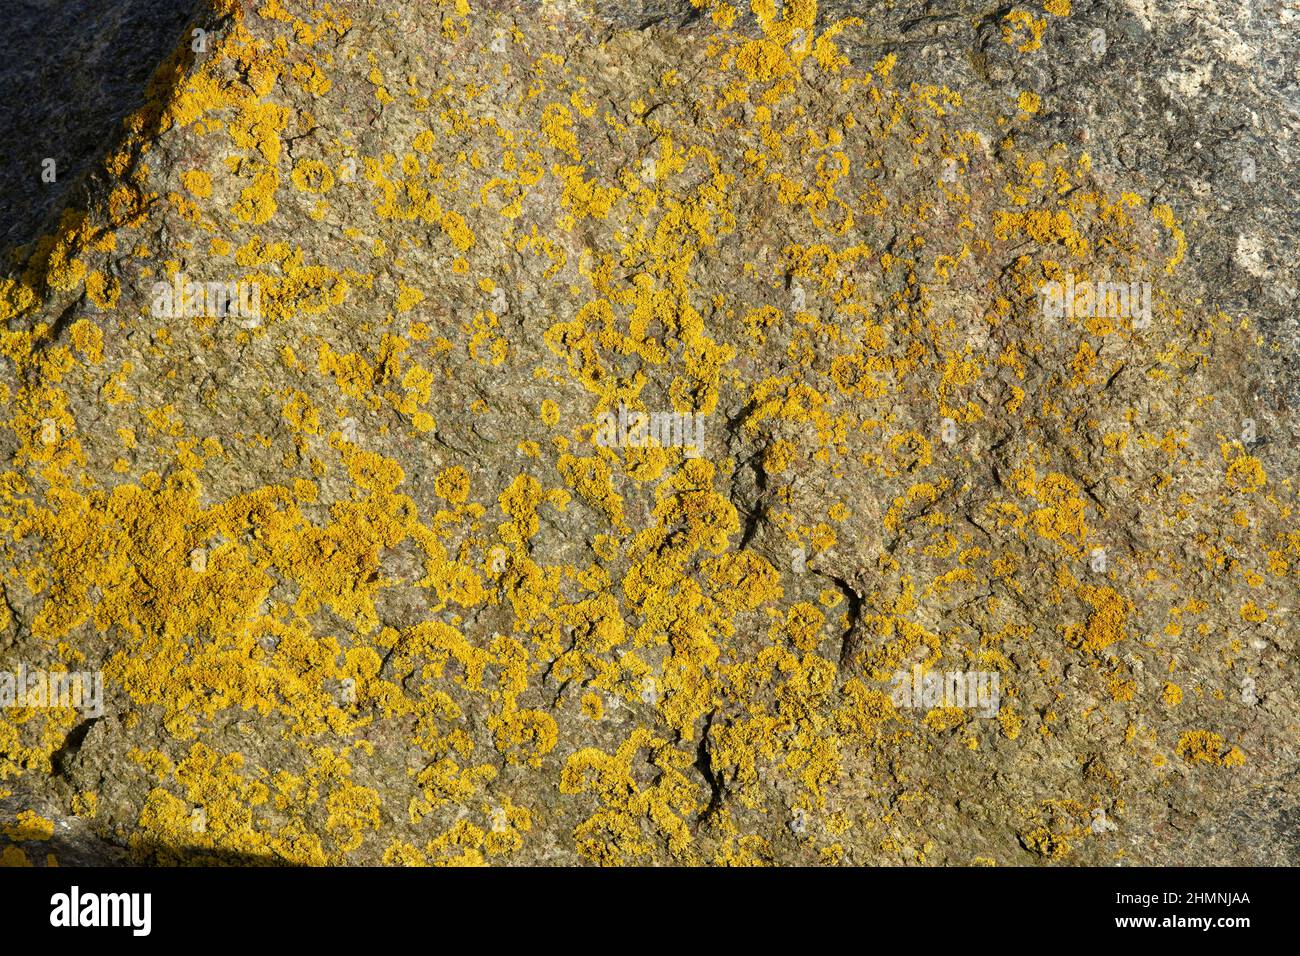 Golden Crust lichen is one of the first rugged organisms to colonise the shorelines. Being salt tolerant it can grow just above the high-tide mark on Stock Photo